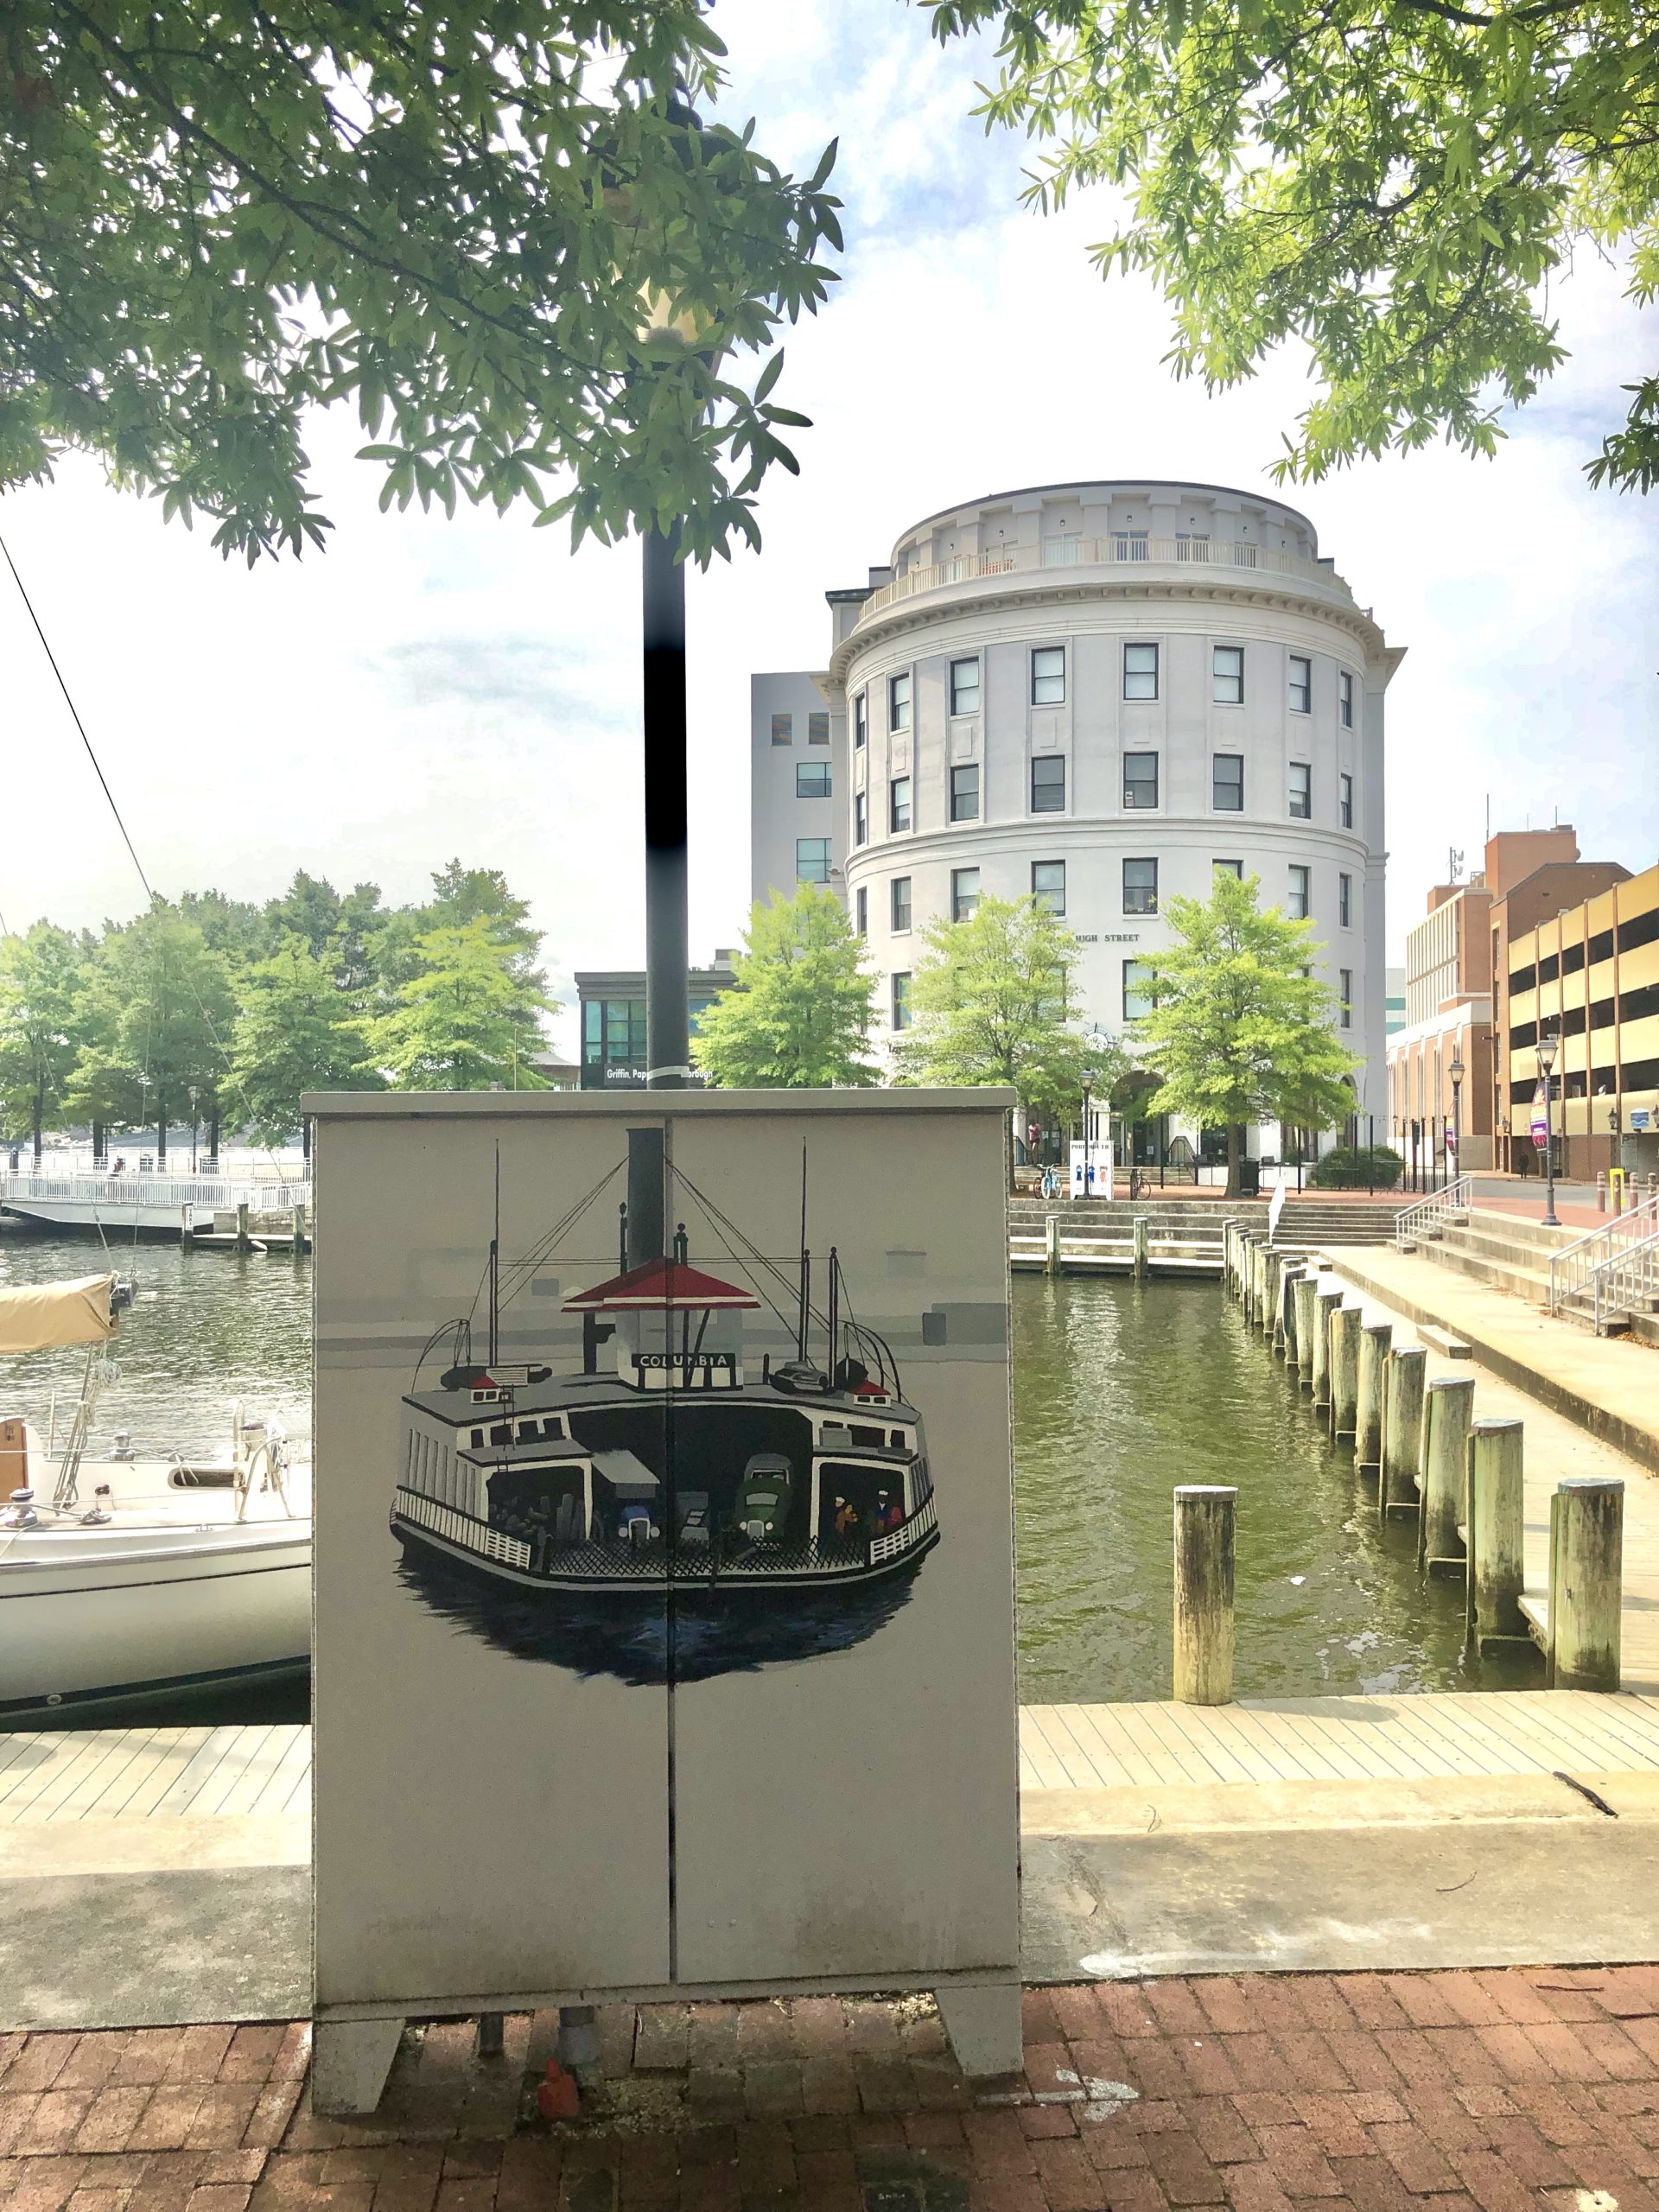 Electrical box with historic sutomobile ferry painted on the side